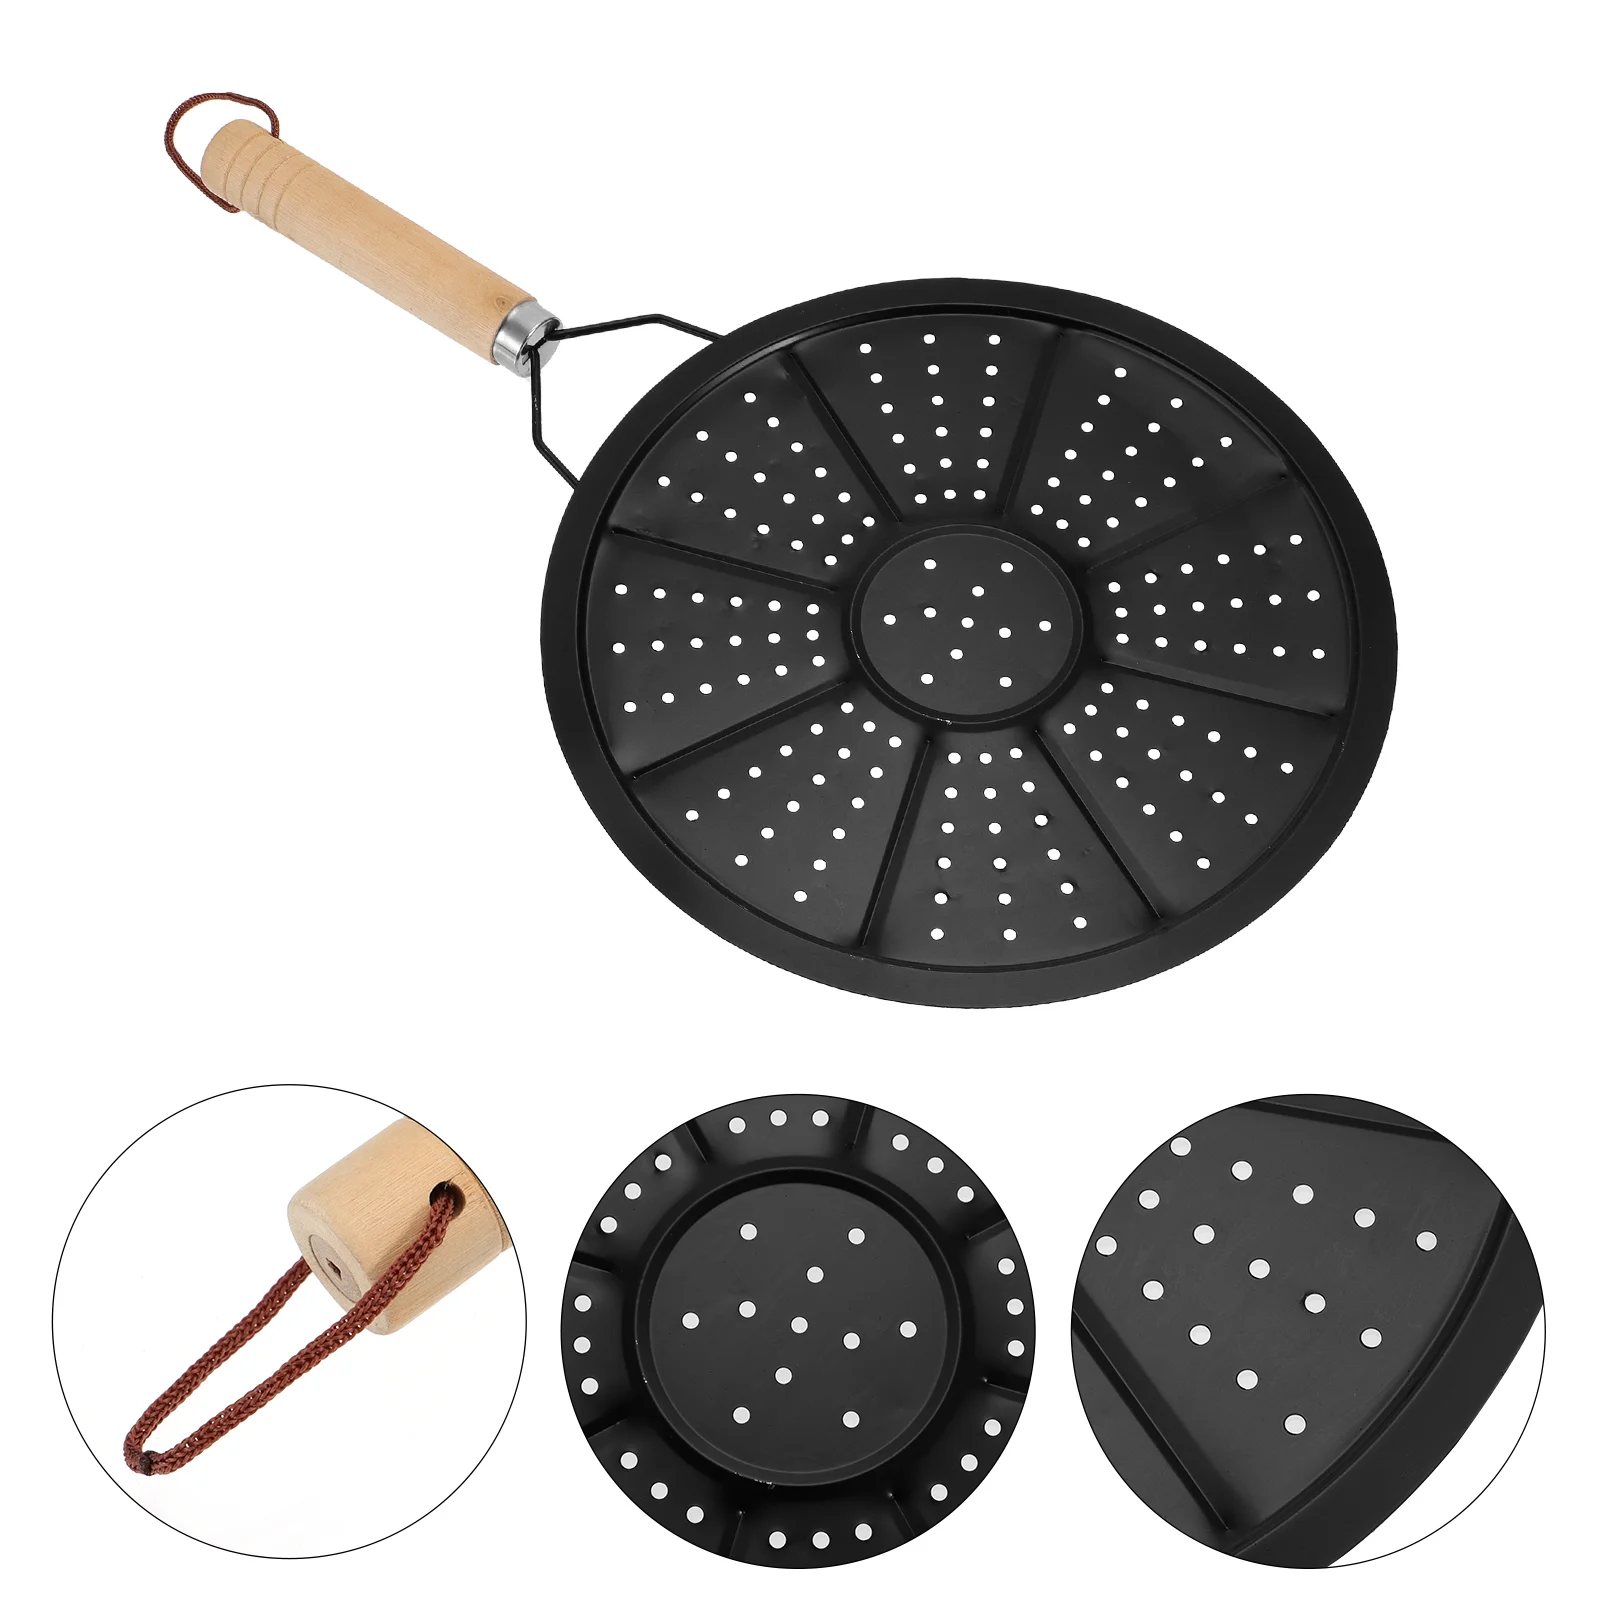 

2 Pcs Diffusers Home Insulation Pads Overheating Protection Wooden Handle Cook Cooler Coffee Mats Anti-scalding